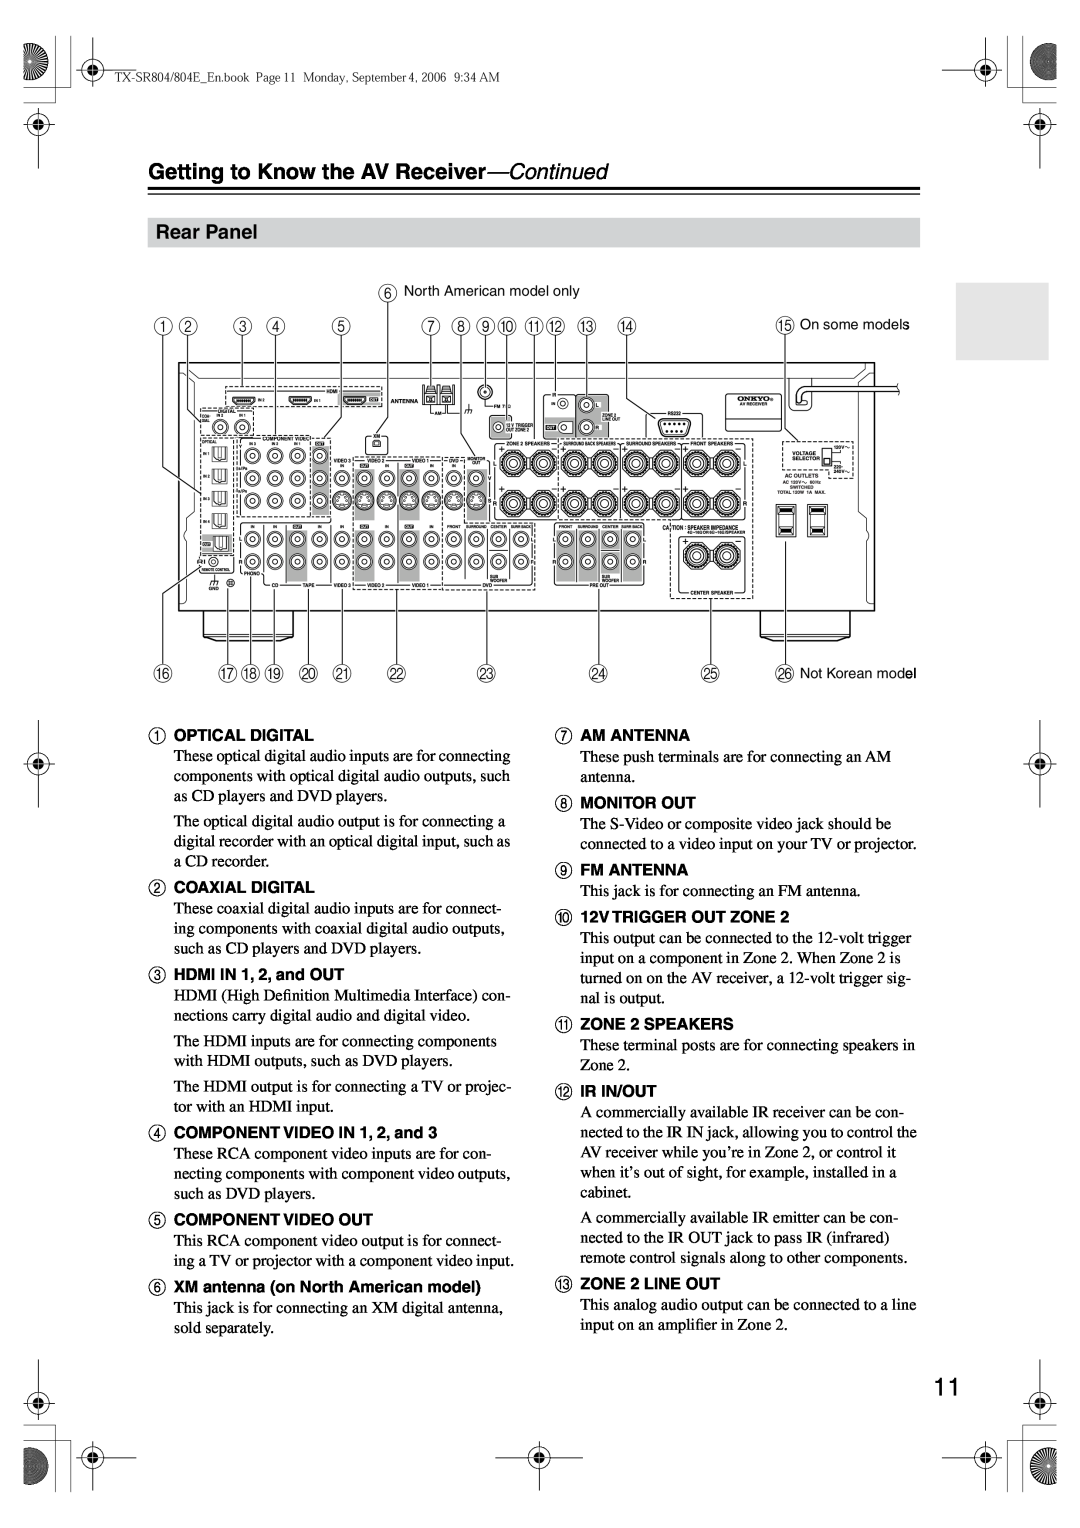 Onkyo TX-SR804E instruction manual Rear Panel, Getting to Know the AV Receiver—Continued 